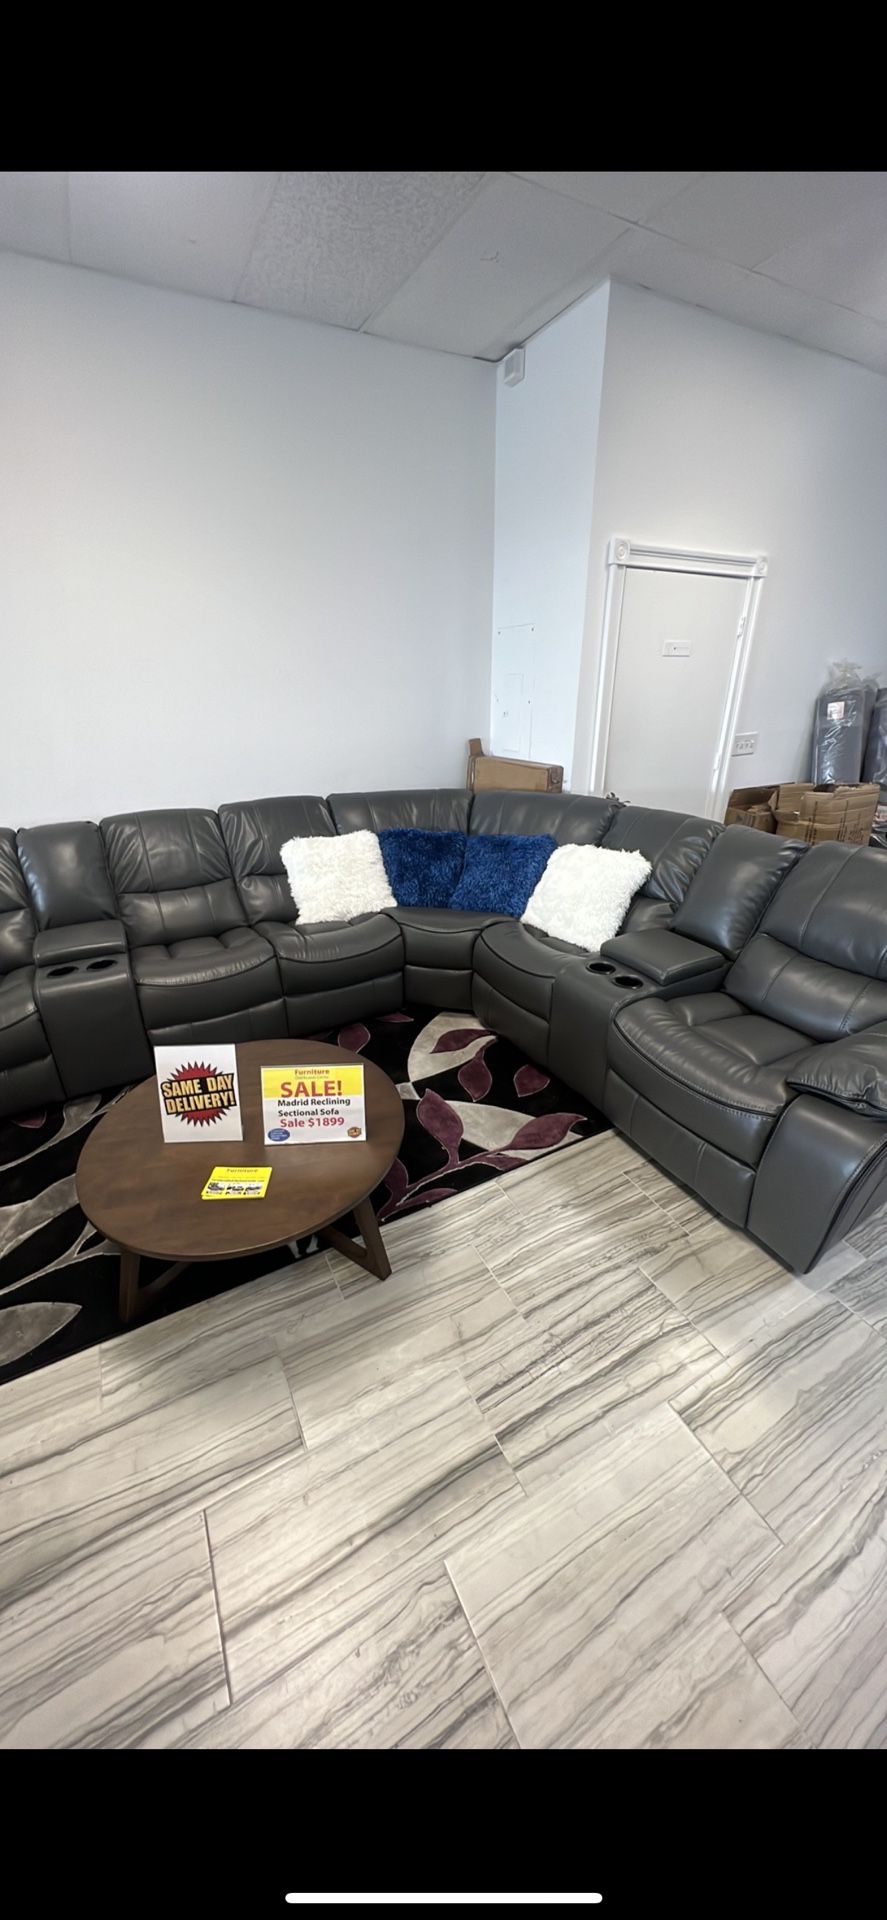 BEAUTIFUL GREY MADRID SECTIONAL SOFA!$1499!*SAME DAY DELIVERY*NO CREDIT NEEDED*EASY FINANCING*HUGE SALE*